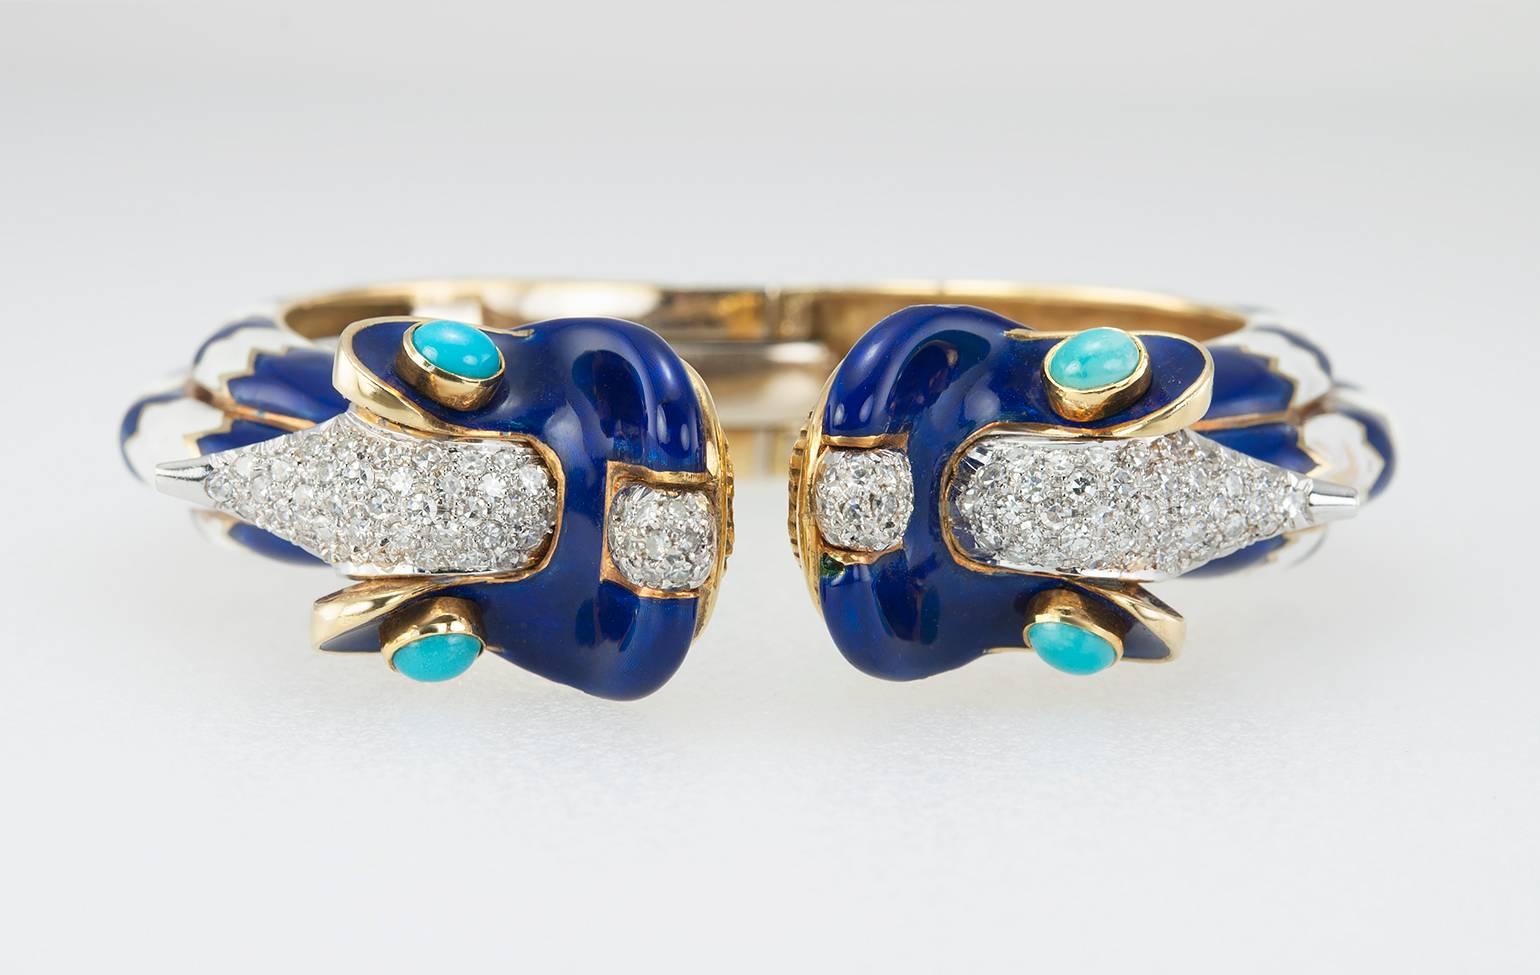 Double dragon hinged cuff bracelet in 18 karat yellow gold from circa 1960s. This very cool piece features blue and white enamel, turquoise cabochon eyes and approximately 2 carats in total diamond weight that make the dragon heads really pop! 